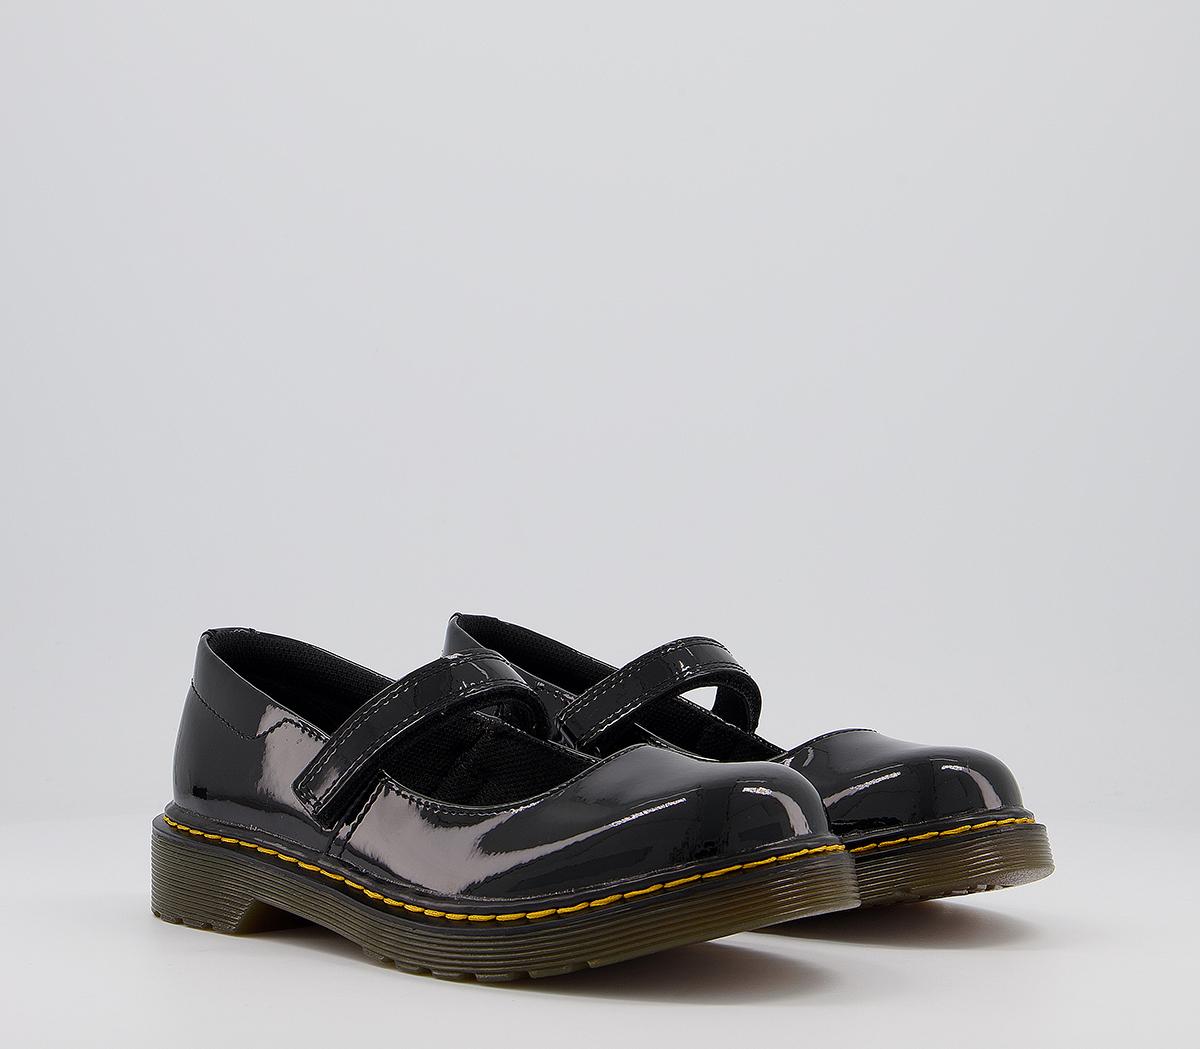 Dr. Martens Kids Maccy (jnr) Black Patent, Size: 10 Youth-1 Youth, 12 Youth